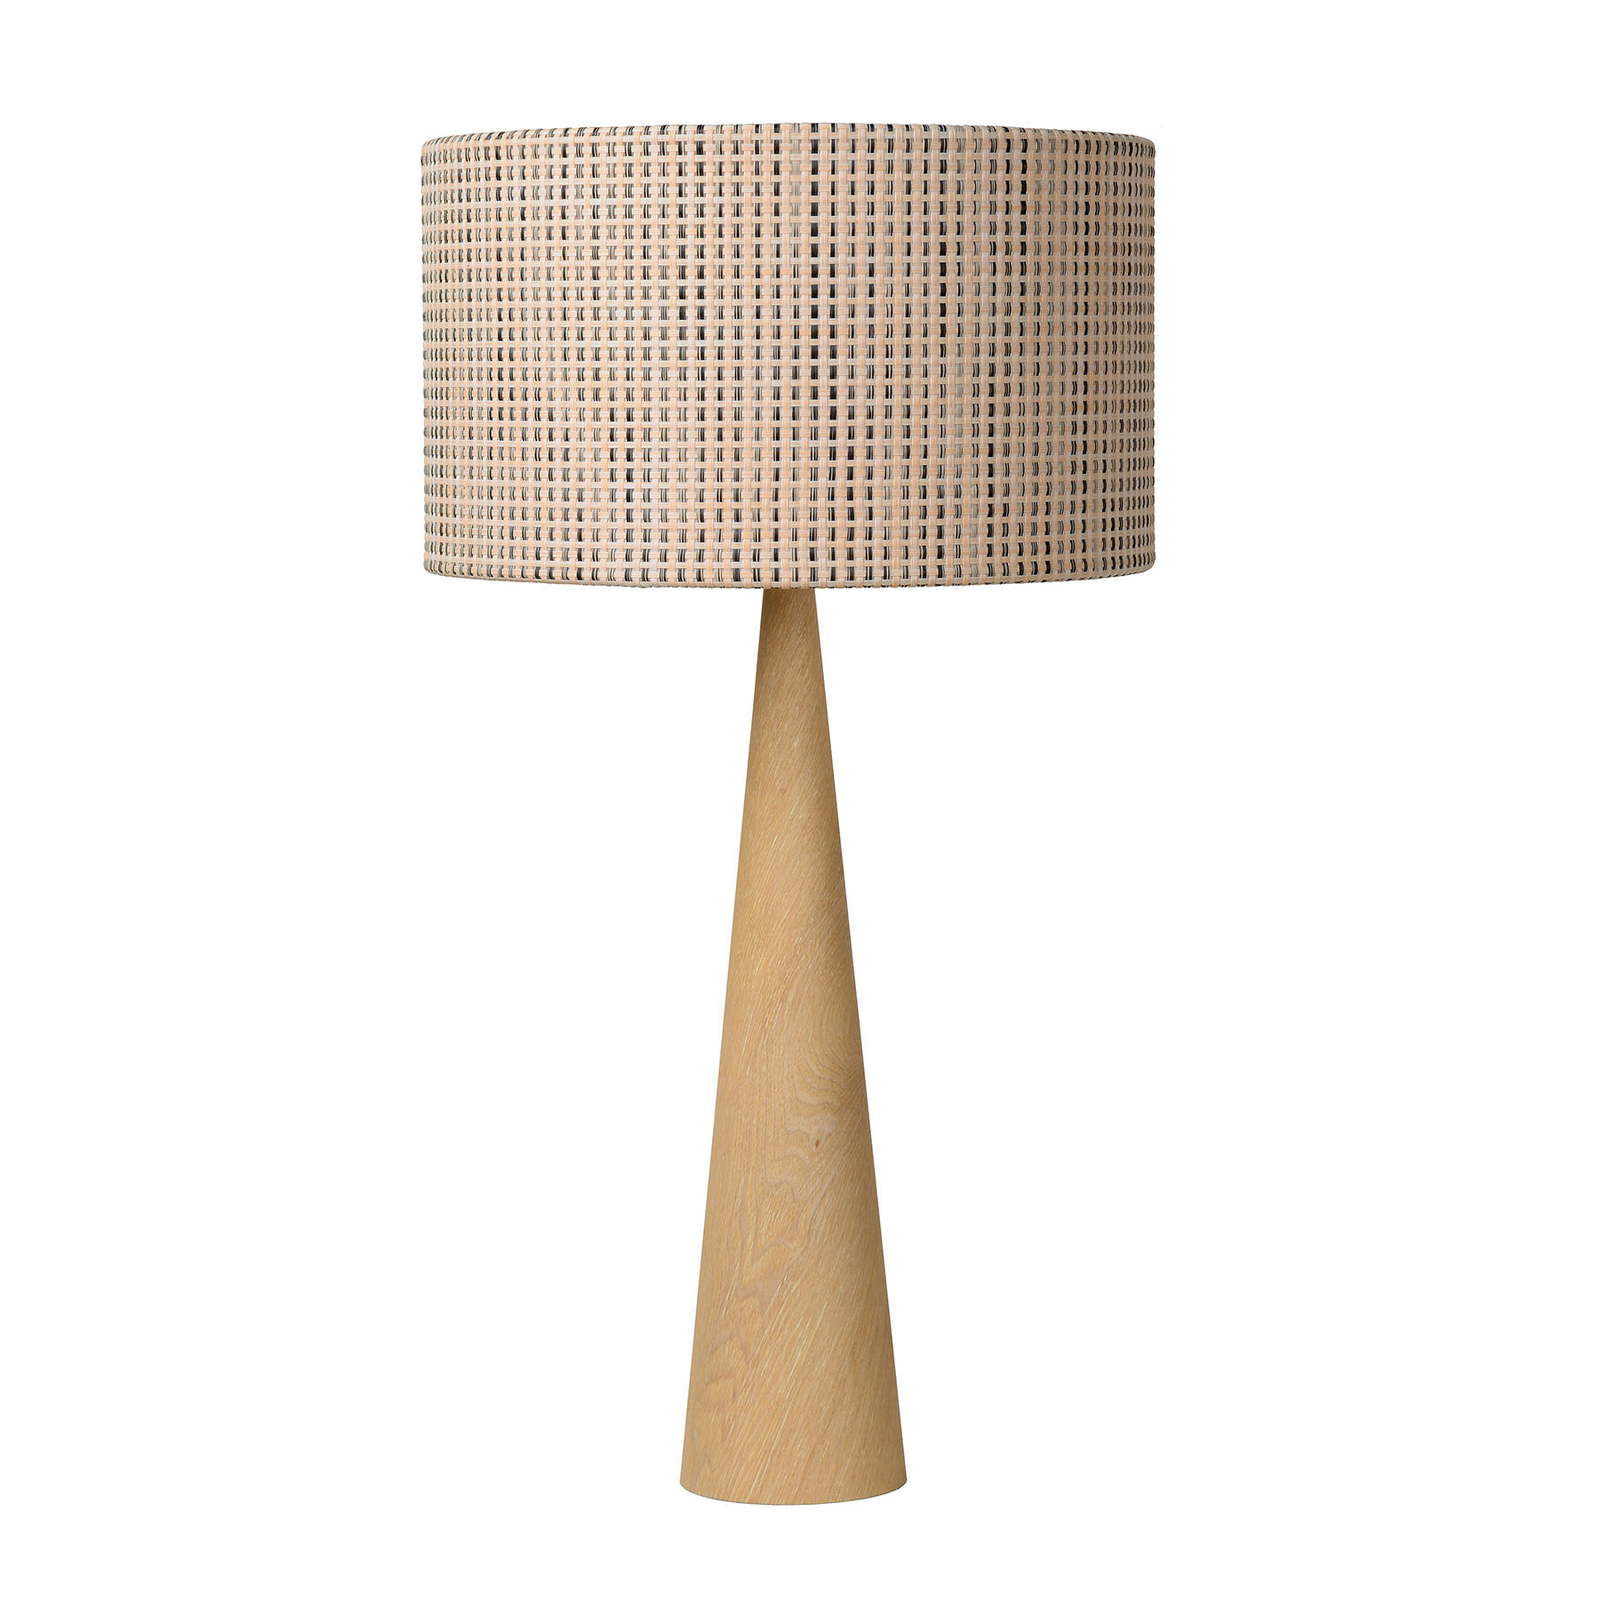 Conos table lamp with light-coloured wooden base